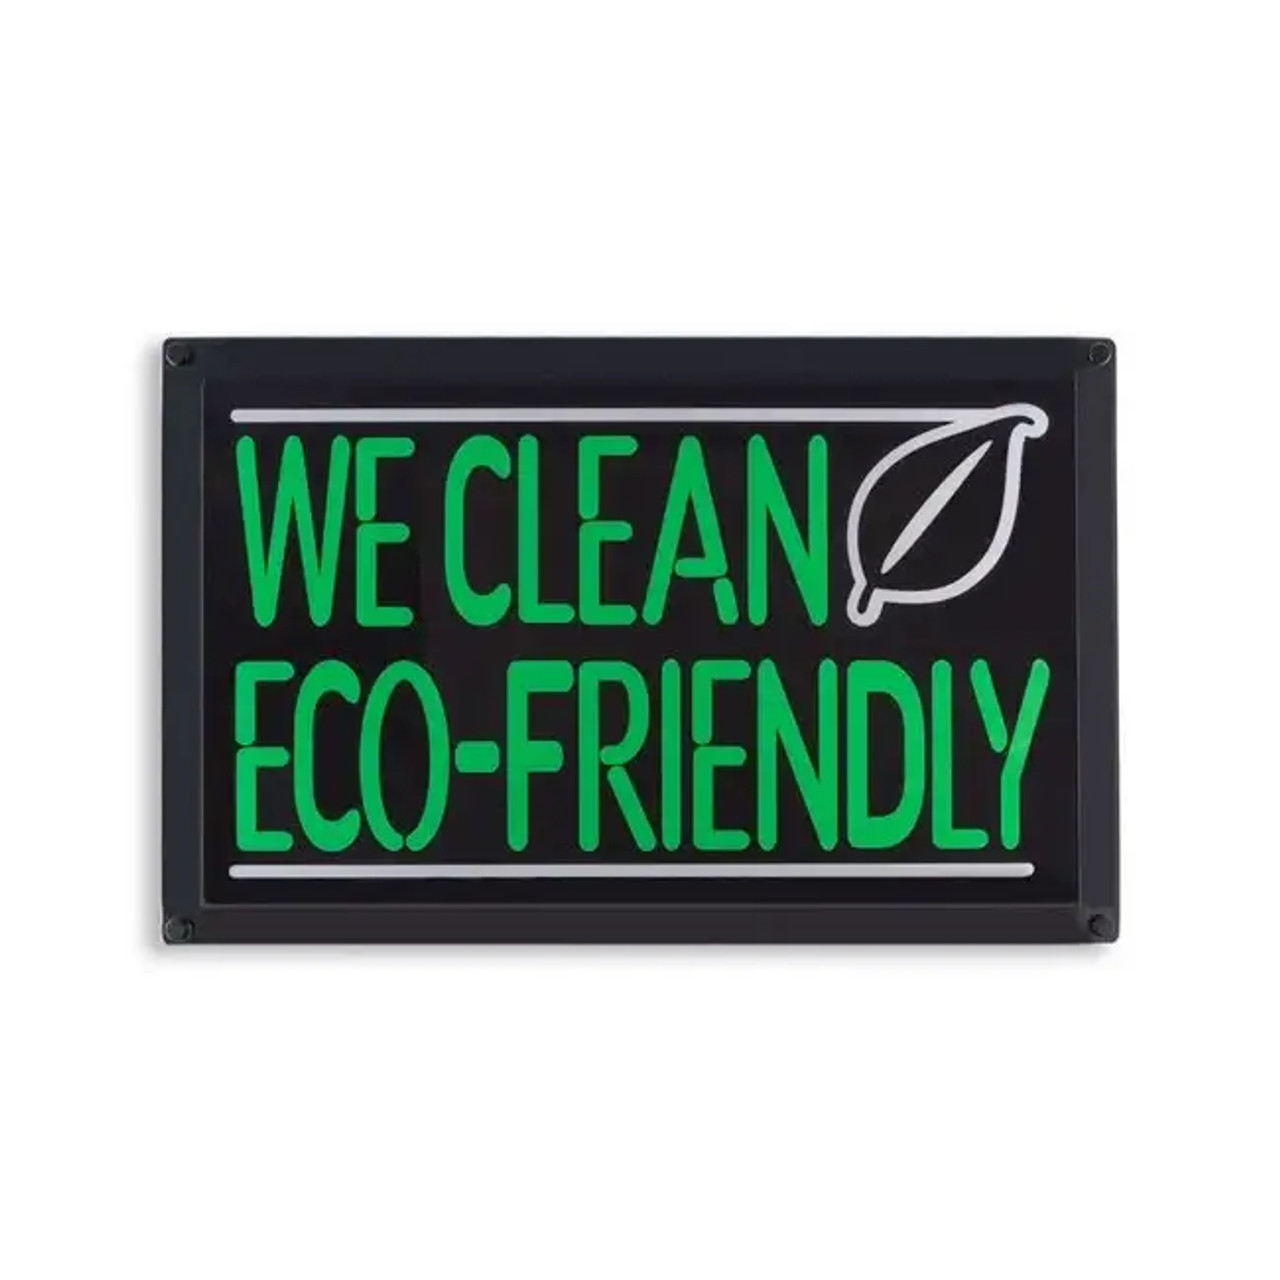 Cleaner's Supply "WE CLEAN ECO-FRIENDLY" SLIM LED SIGN - 22" X 14" X 1/2" - Chicken Pieces